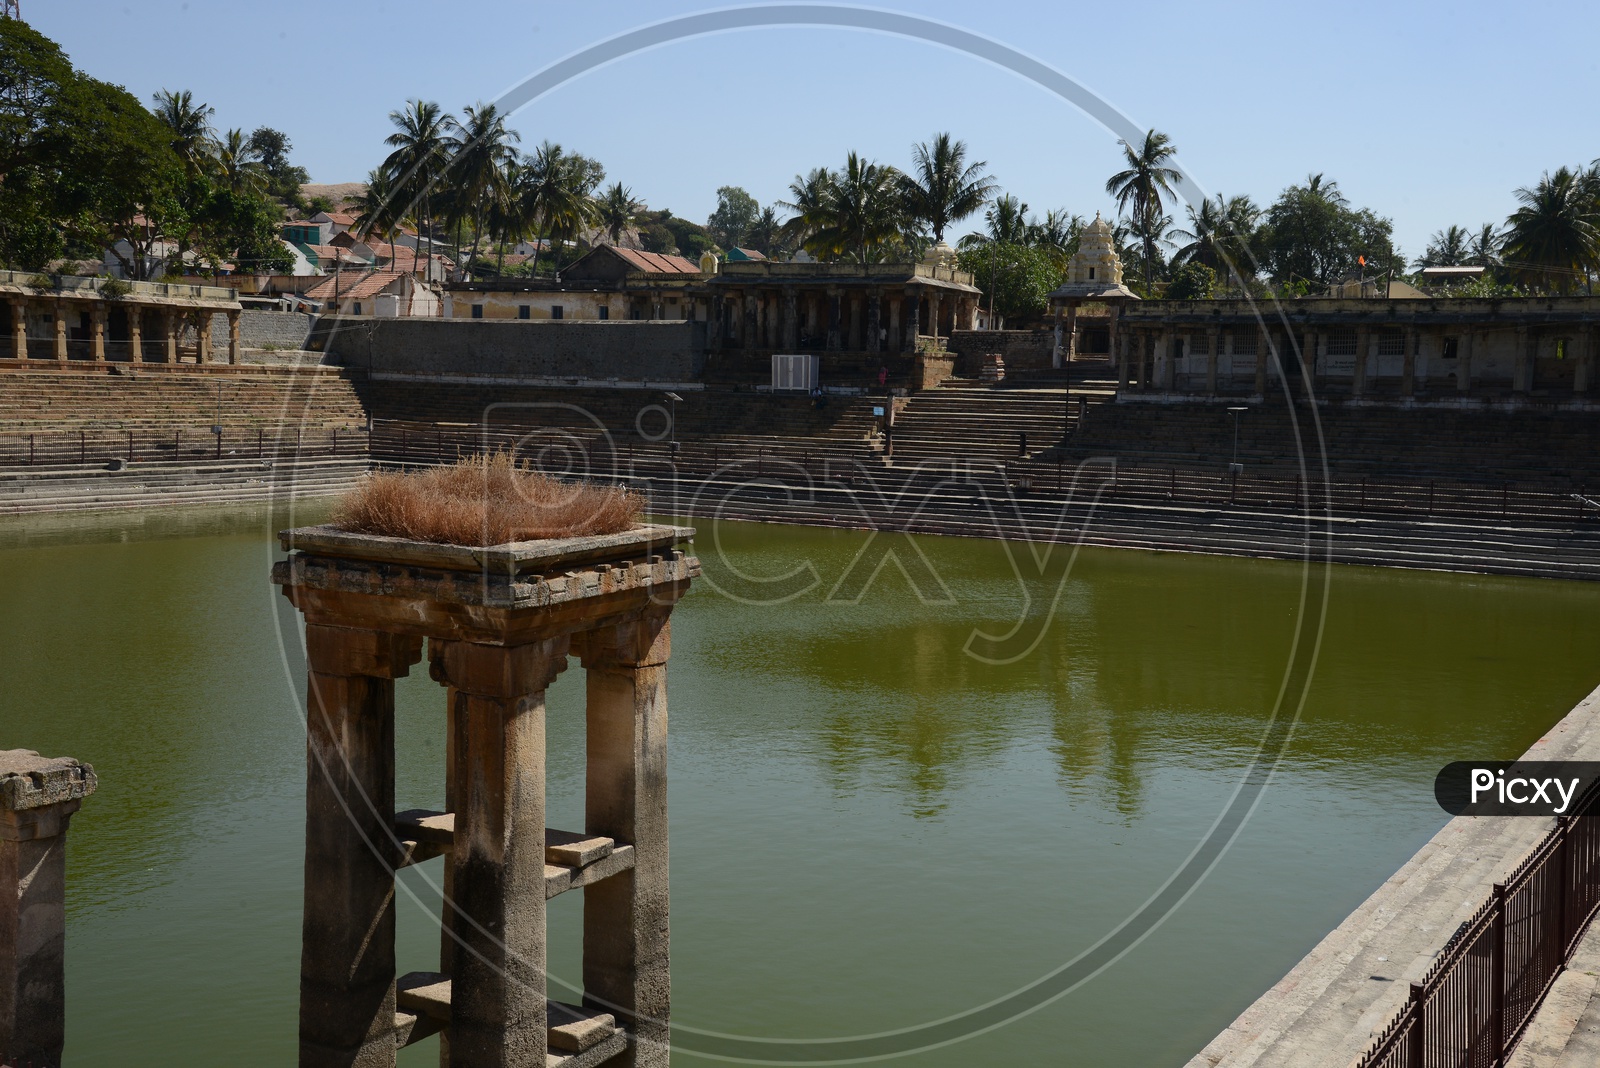 Architecture Of Temple Tank At a Hindu Temple